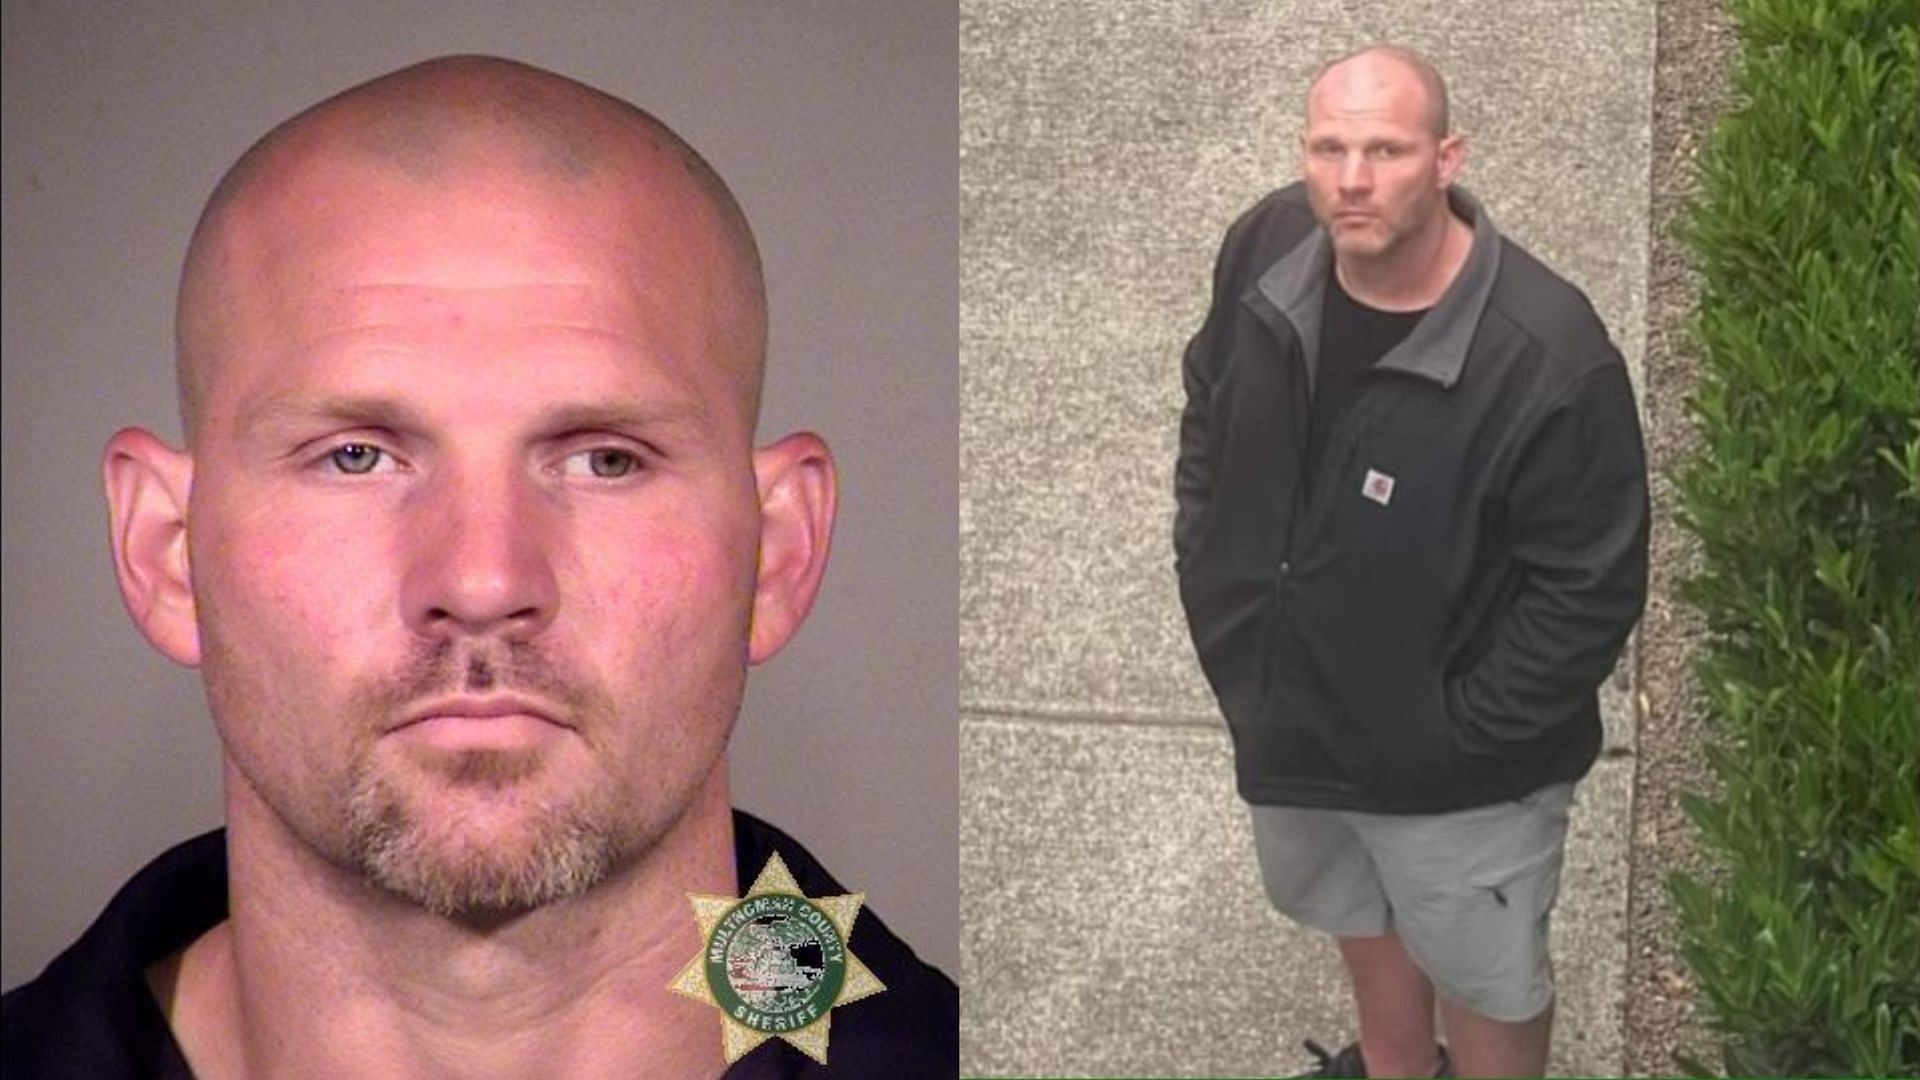 Daniel Thomas Warren is being sought by Portland Police as the suspect in a &quot;racially motivated&quot; attack. (Image via Twitter/@PortlandPolice, @Johnnthelefty)